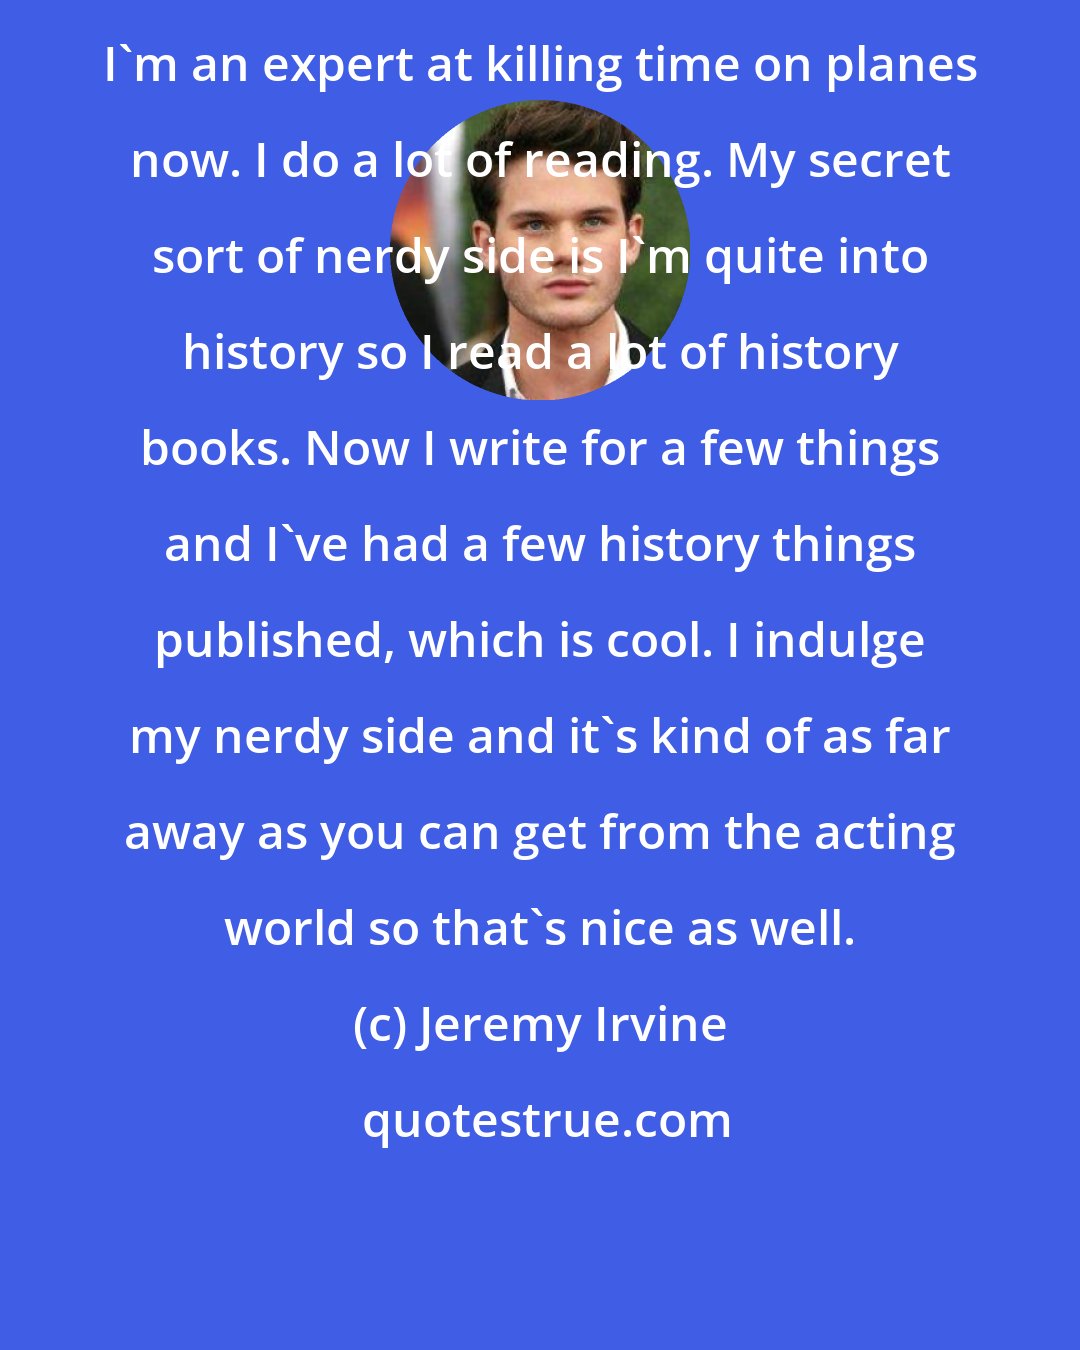 Jeremy Irvine: I'm an expert at killing time on planes now. I do a lot of reading. My secret sort of nerdy side is I'm quite into history so I read a lot of history books. Now I write for a few things and I've had a few history things published, which is cool. I indulge my nerdy side and it's kind of as far away as you can get from the acting world so that's nice as well.